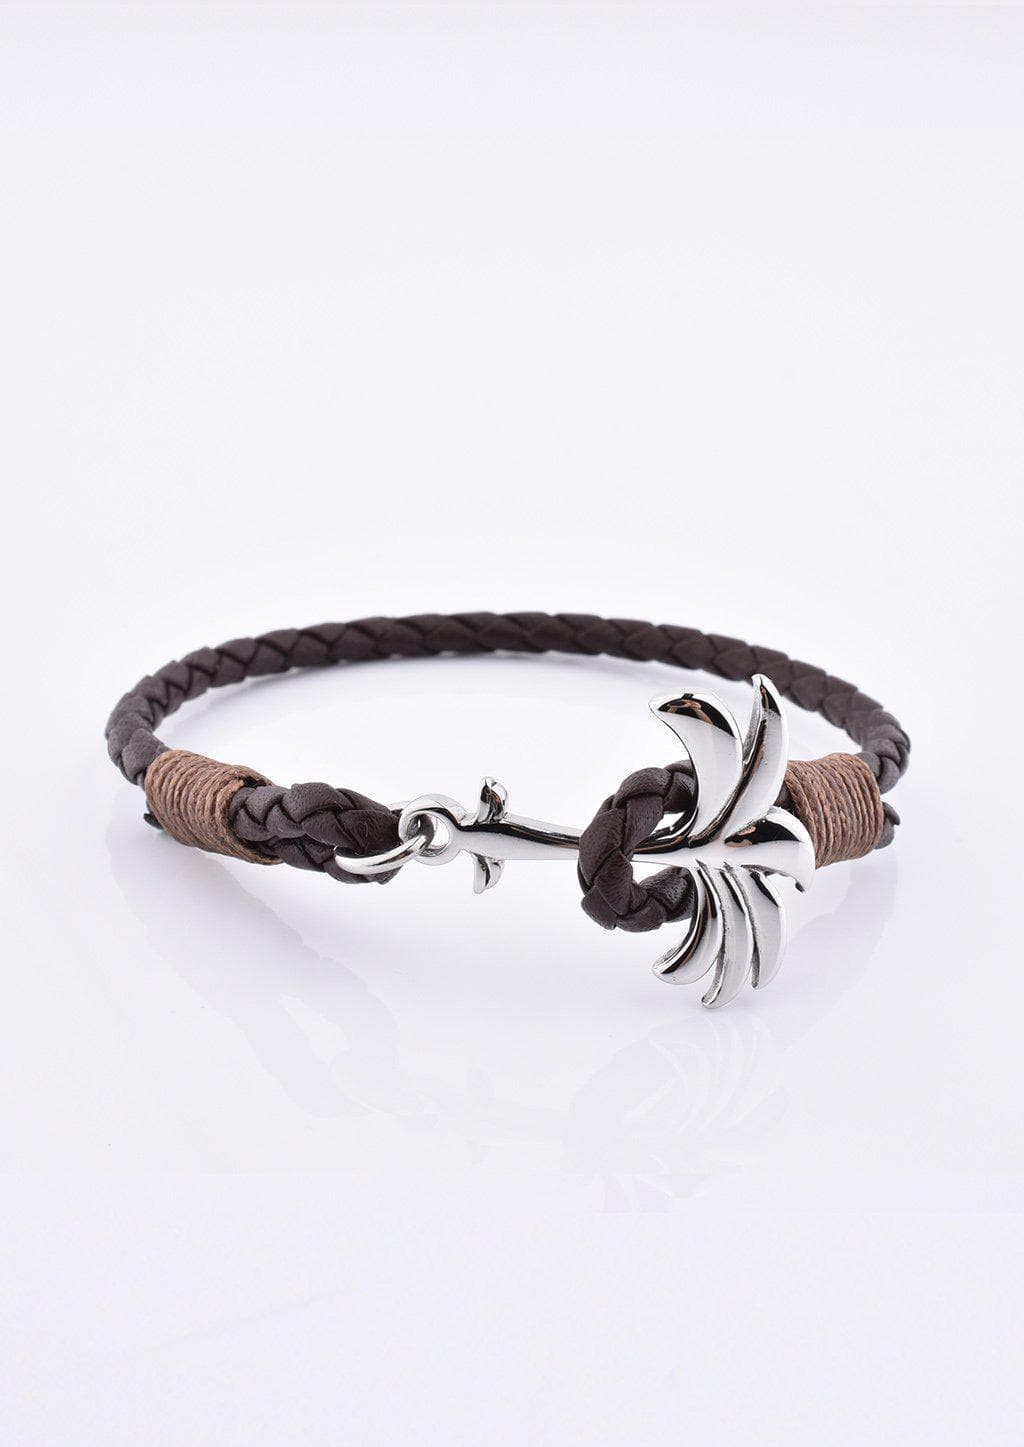 Oakland - Season two Palm anchor bracelet with brown leather.